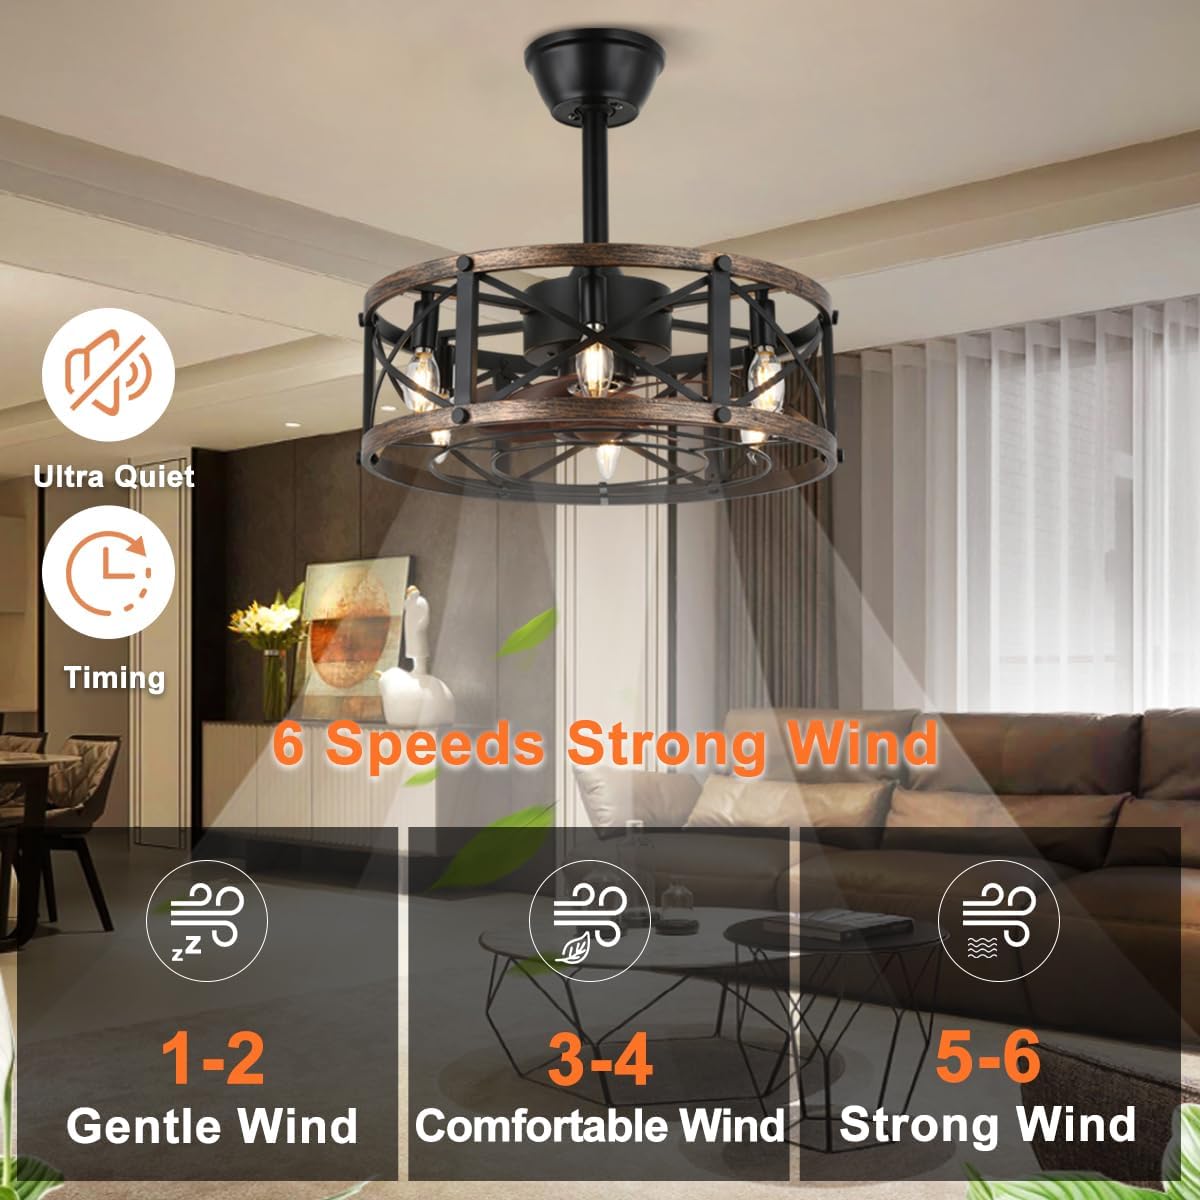 SHLUCE 19" Farmhouse Caged ceiling fan with light, 6 Speed, 6-Light, Fandelier Bladeless Ceiling Fans with Lights, Low Profile Enclosed Small Ceiling Fans for Farmhouse, Bedroom, Black (Black Gold)